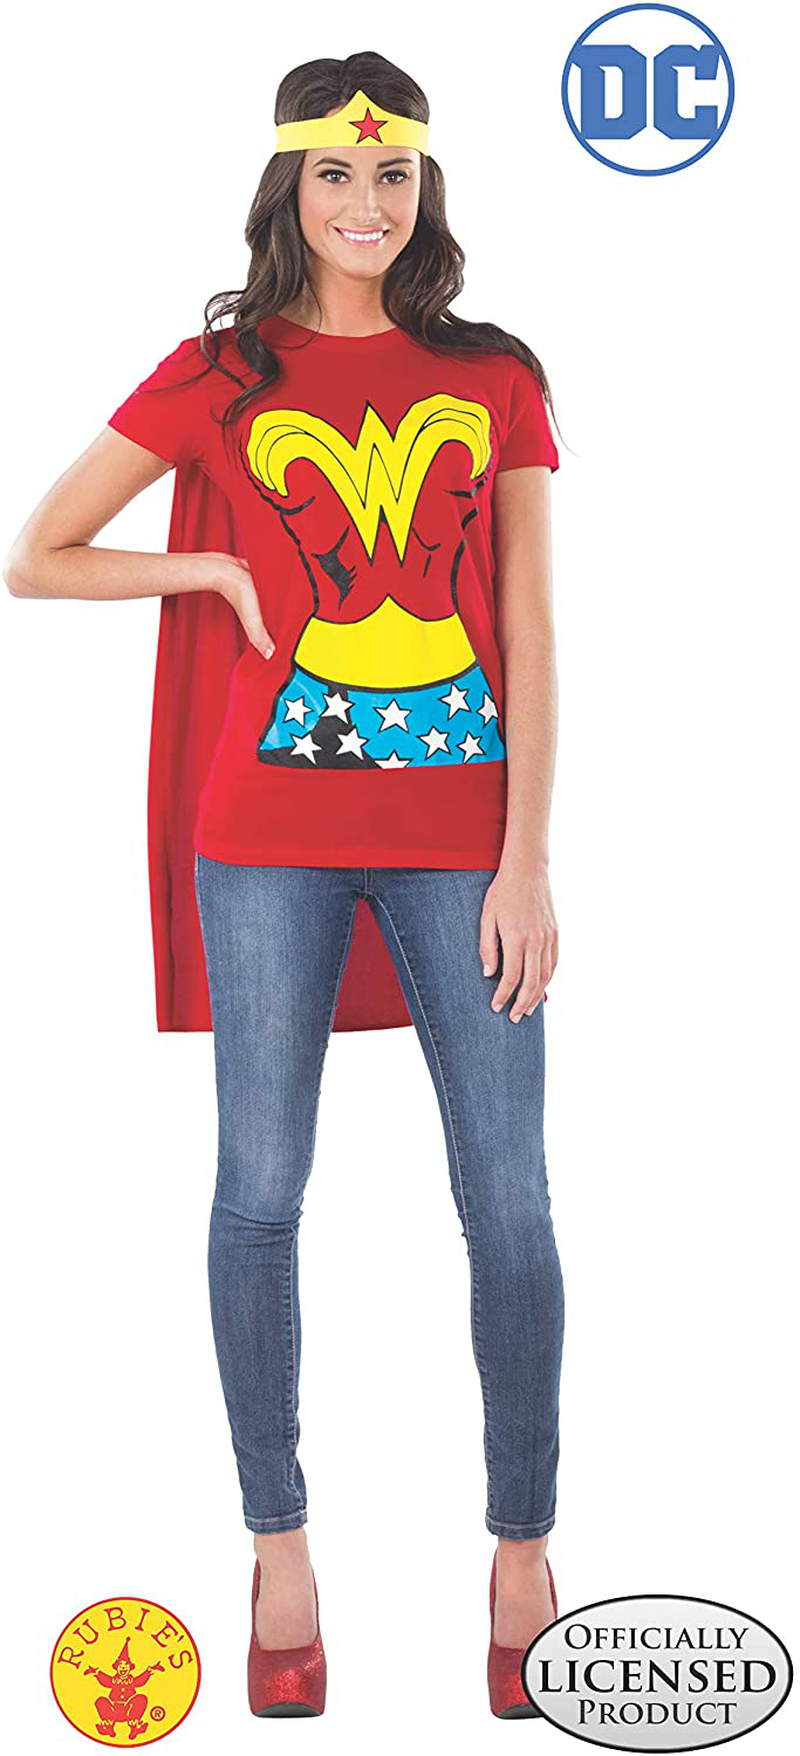 Rubies Women's DC Comics Wonder Woman T-Shirt with Cape and Headband Apparel & Accessories > Costumes & Accessories > Costumes KOL DEALS   